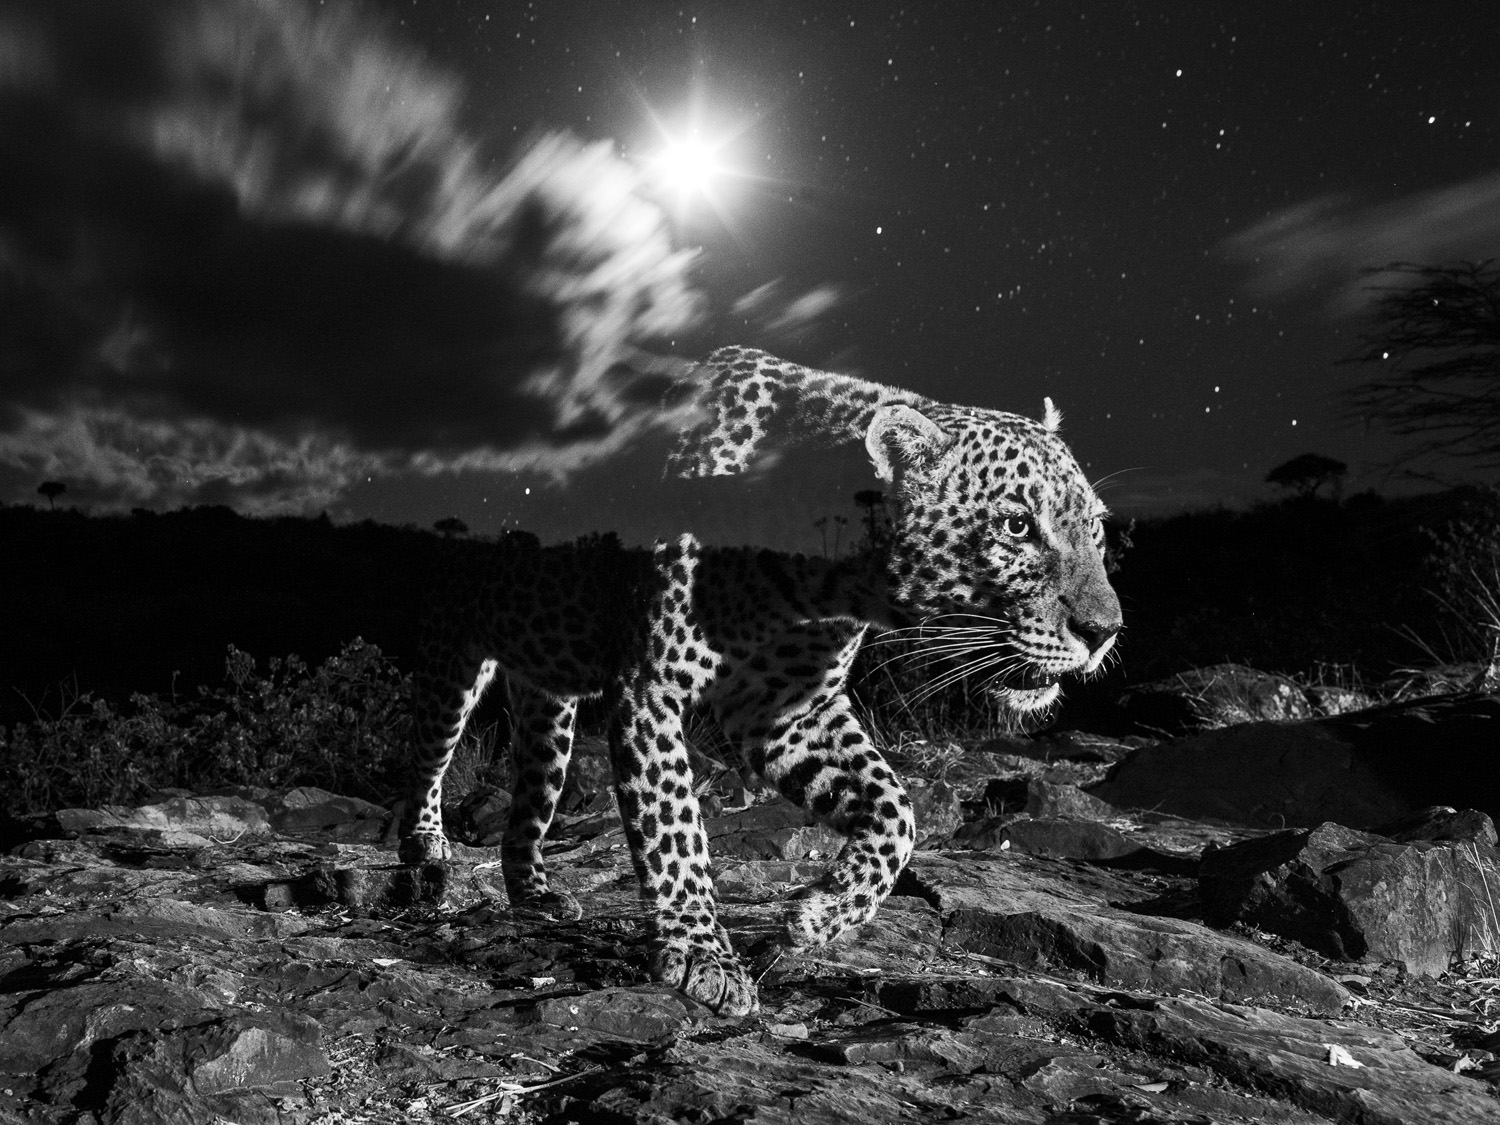 One of TPOTY 2021 'Living World' portfolio winner Will Burrard-Lucas' images of leopards at night